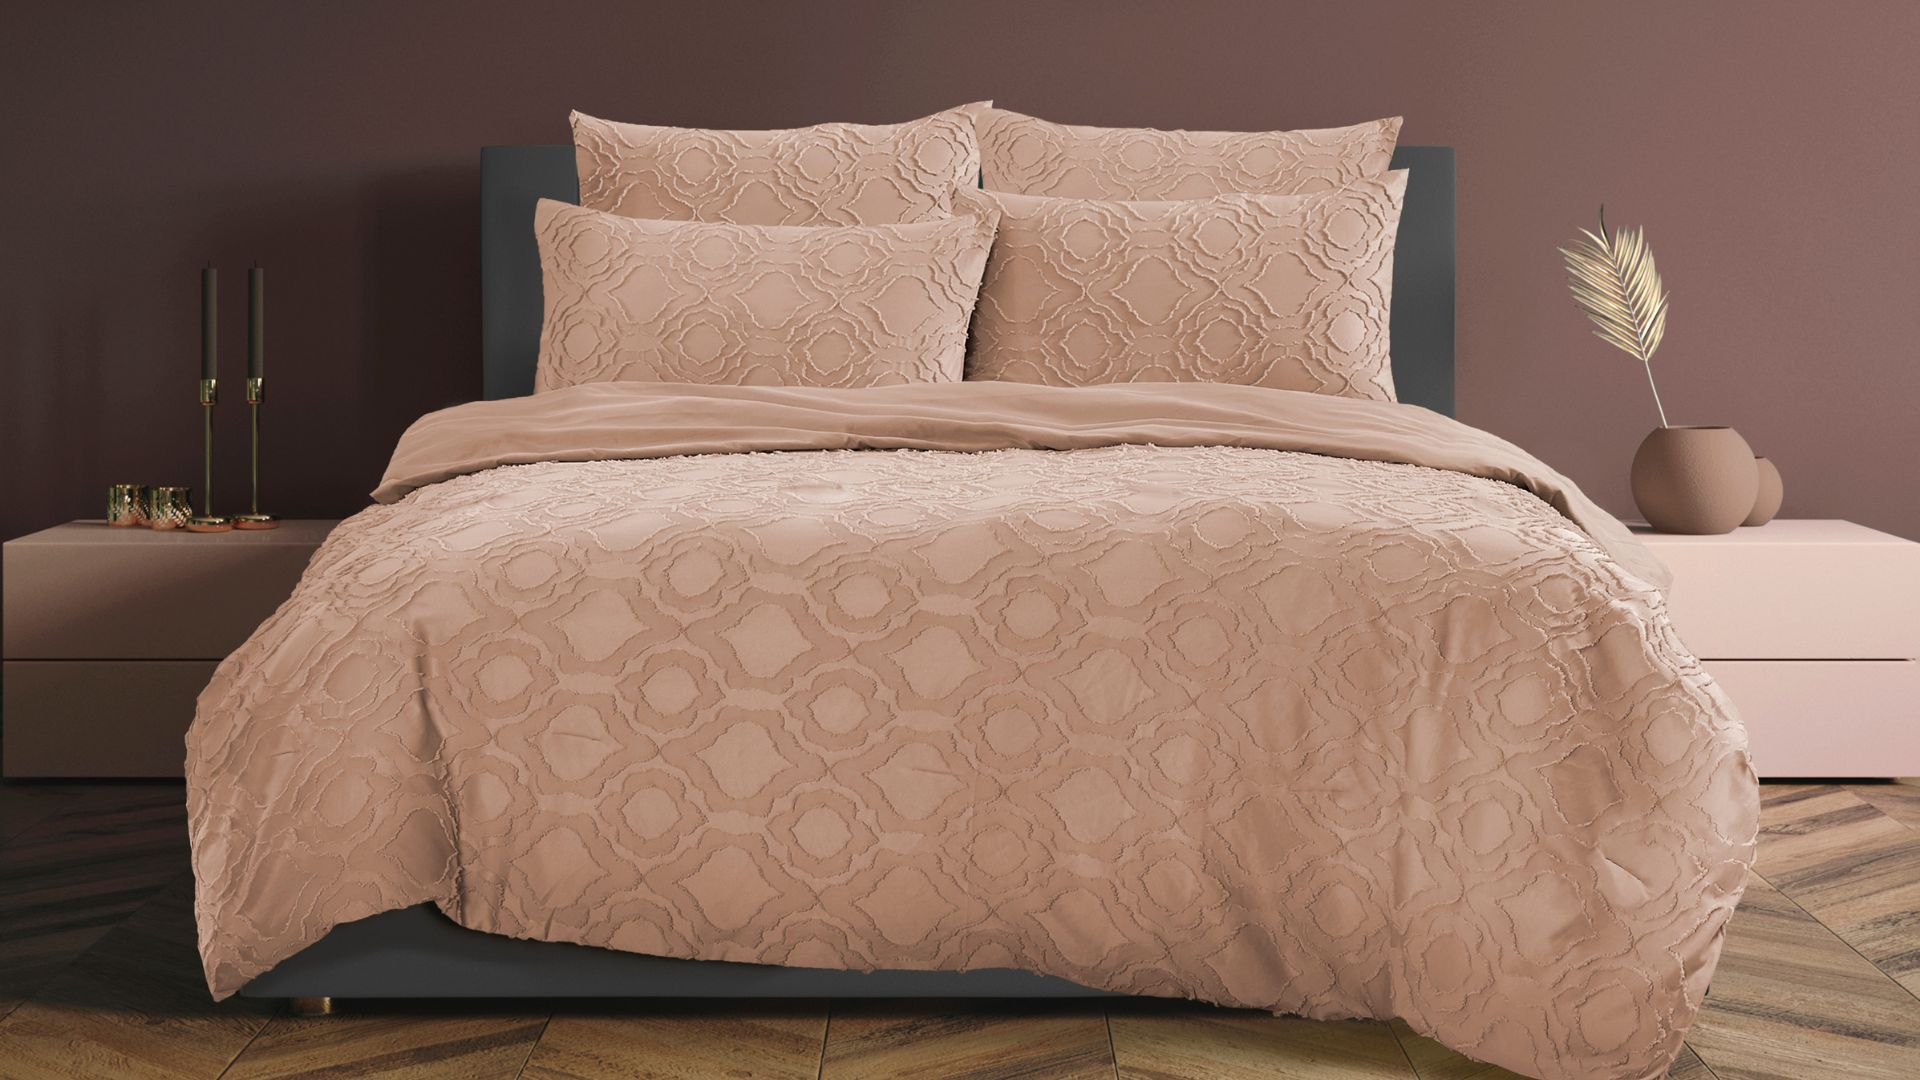 Coverlet vs comforter - which one do you need?